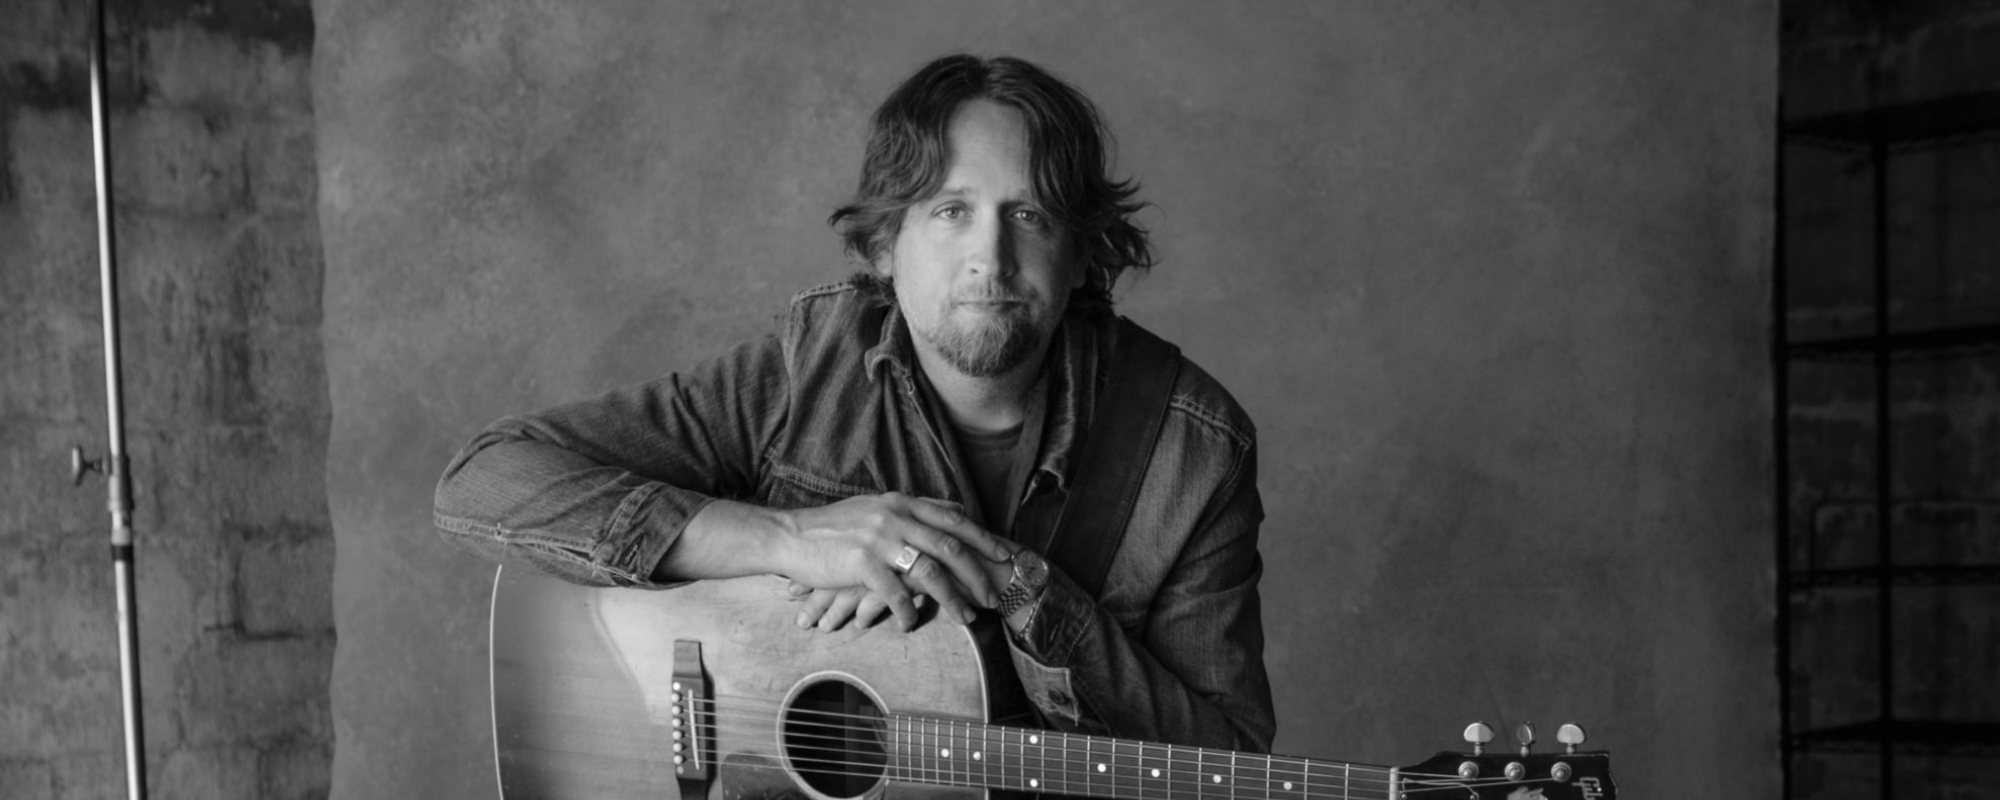 WATCH: Hayes Carll Highlights Alzheimer’s Dementia in a Moving Music Video for Latest Single “Help Me Remember”